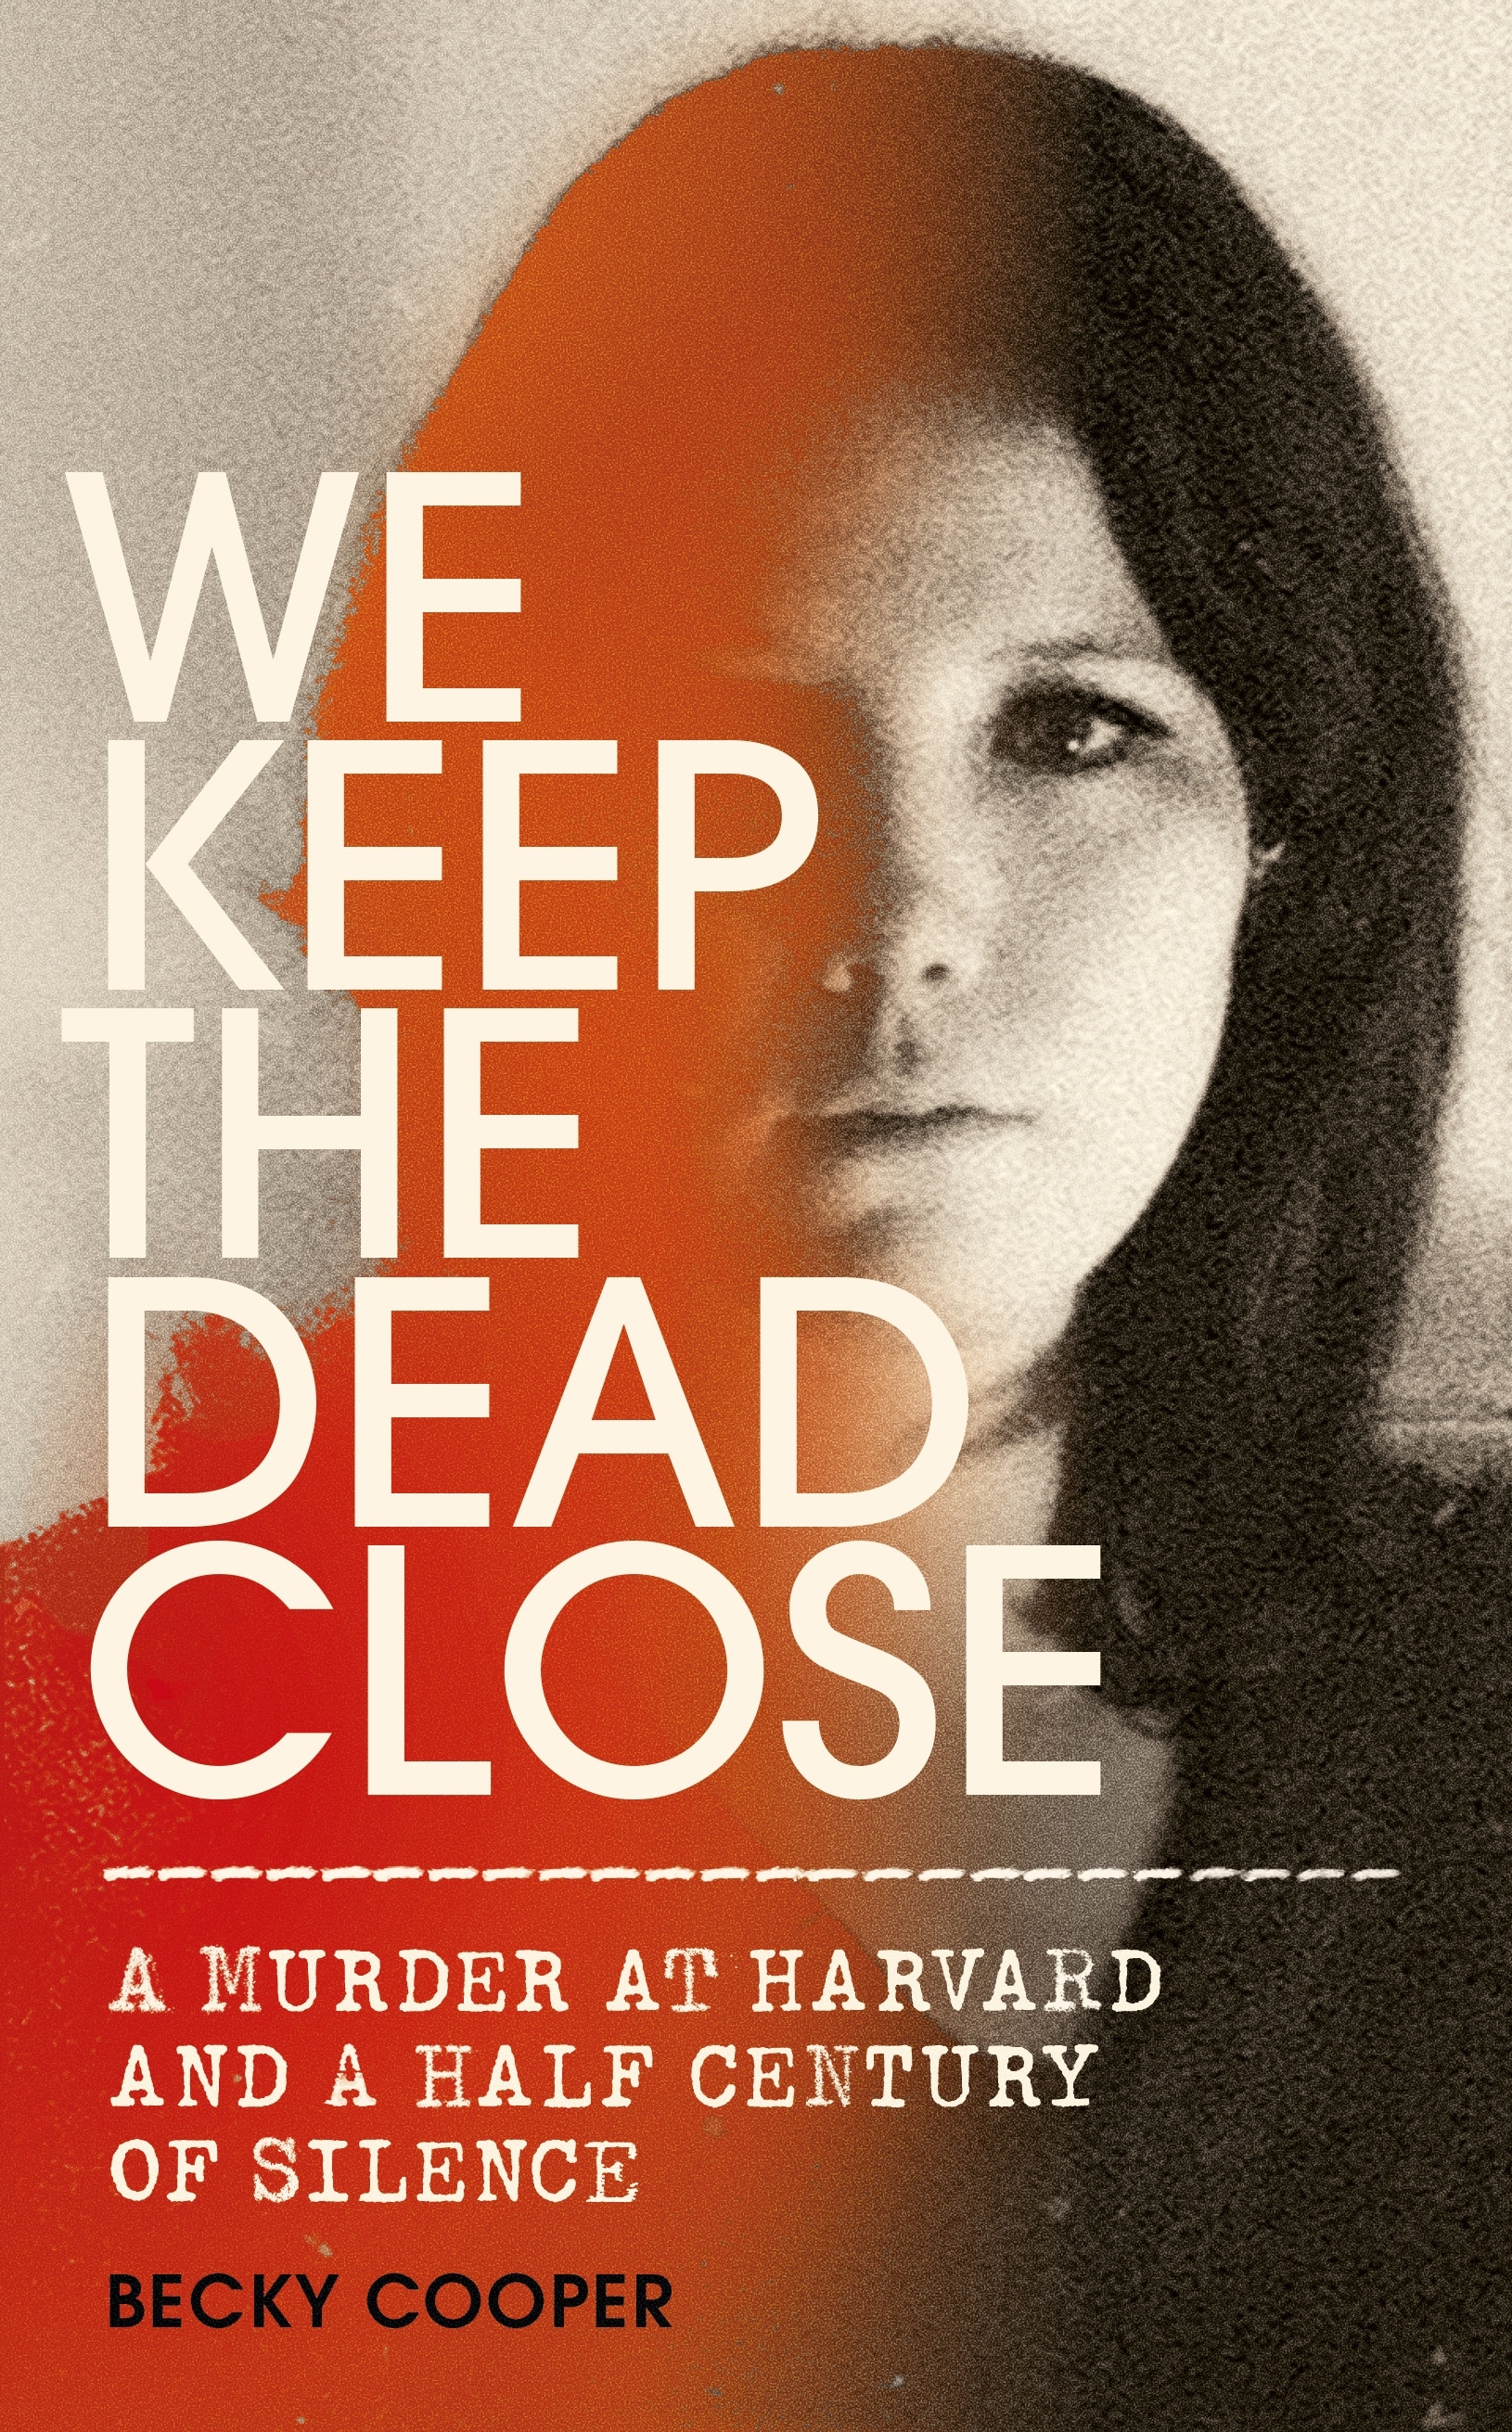 Book “We Keep the Dead Close” by Becky Cooper — December 3, 2020